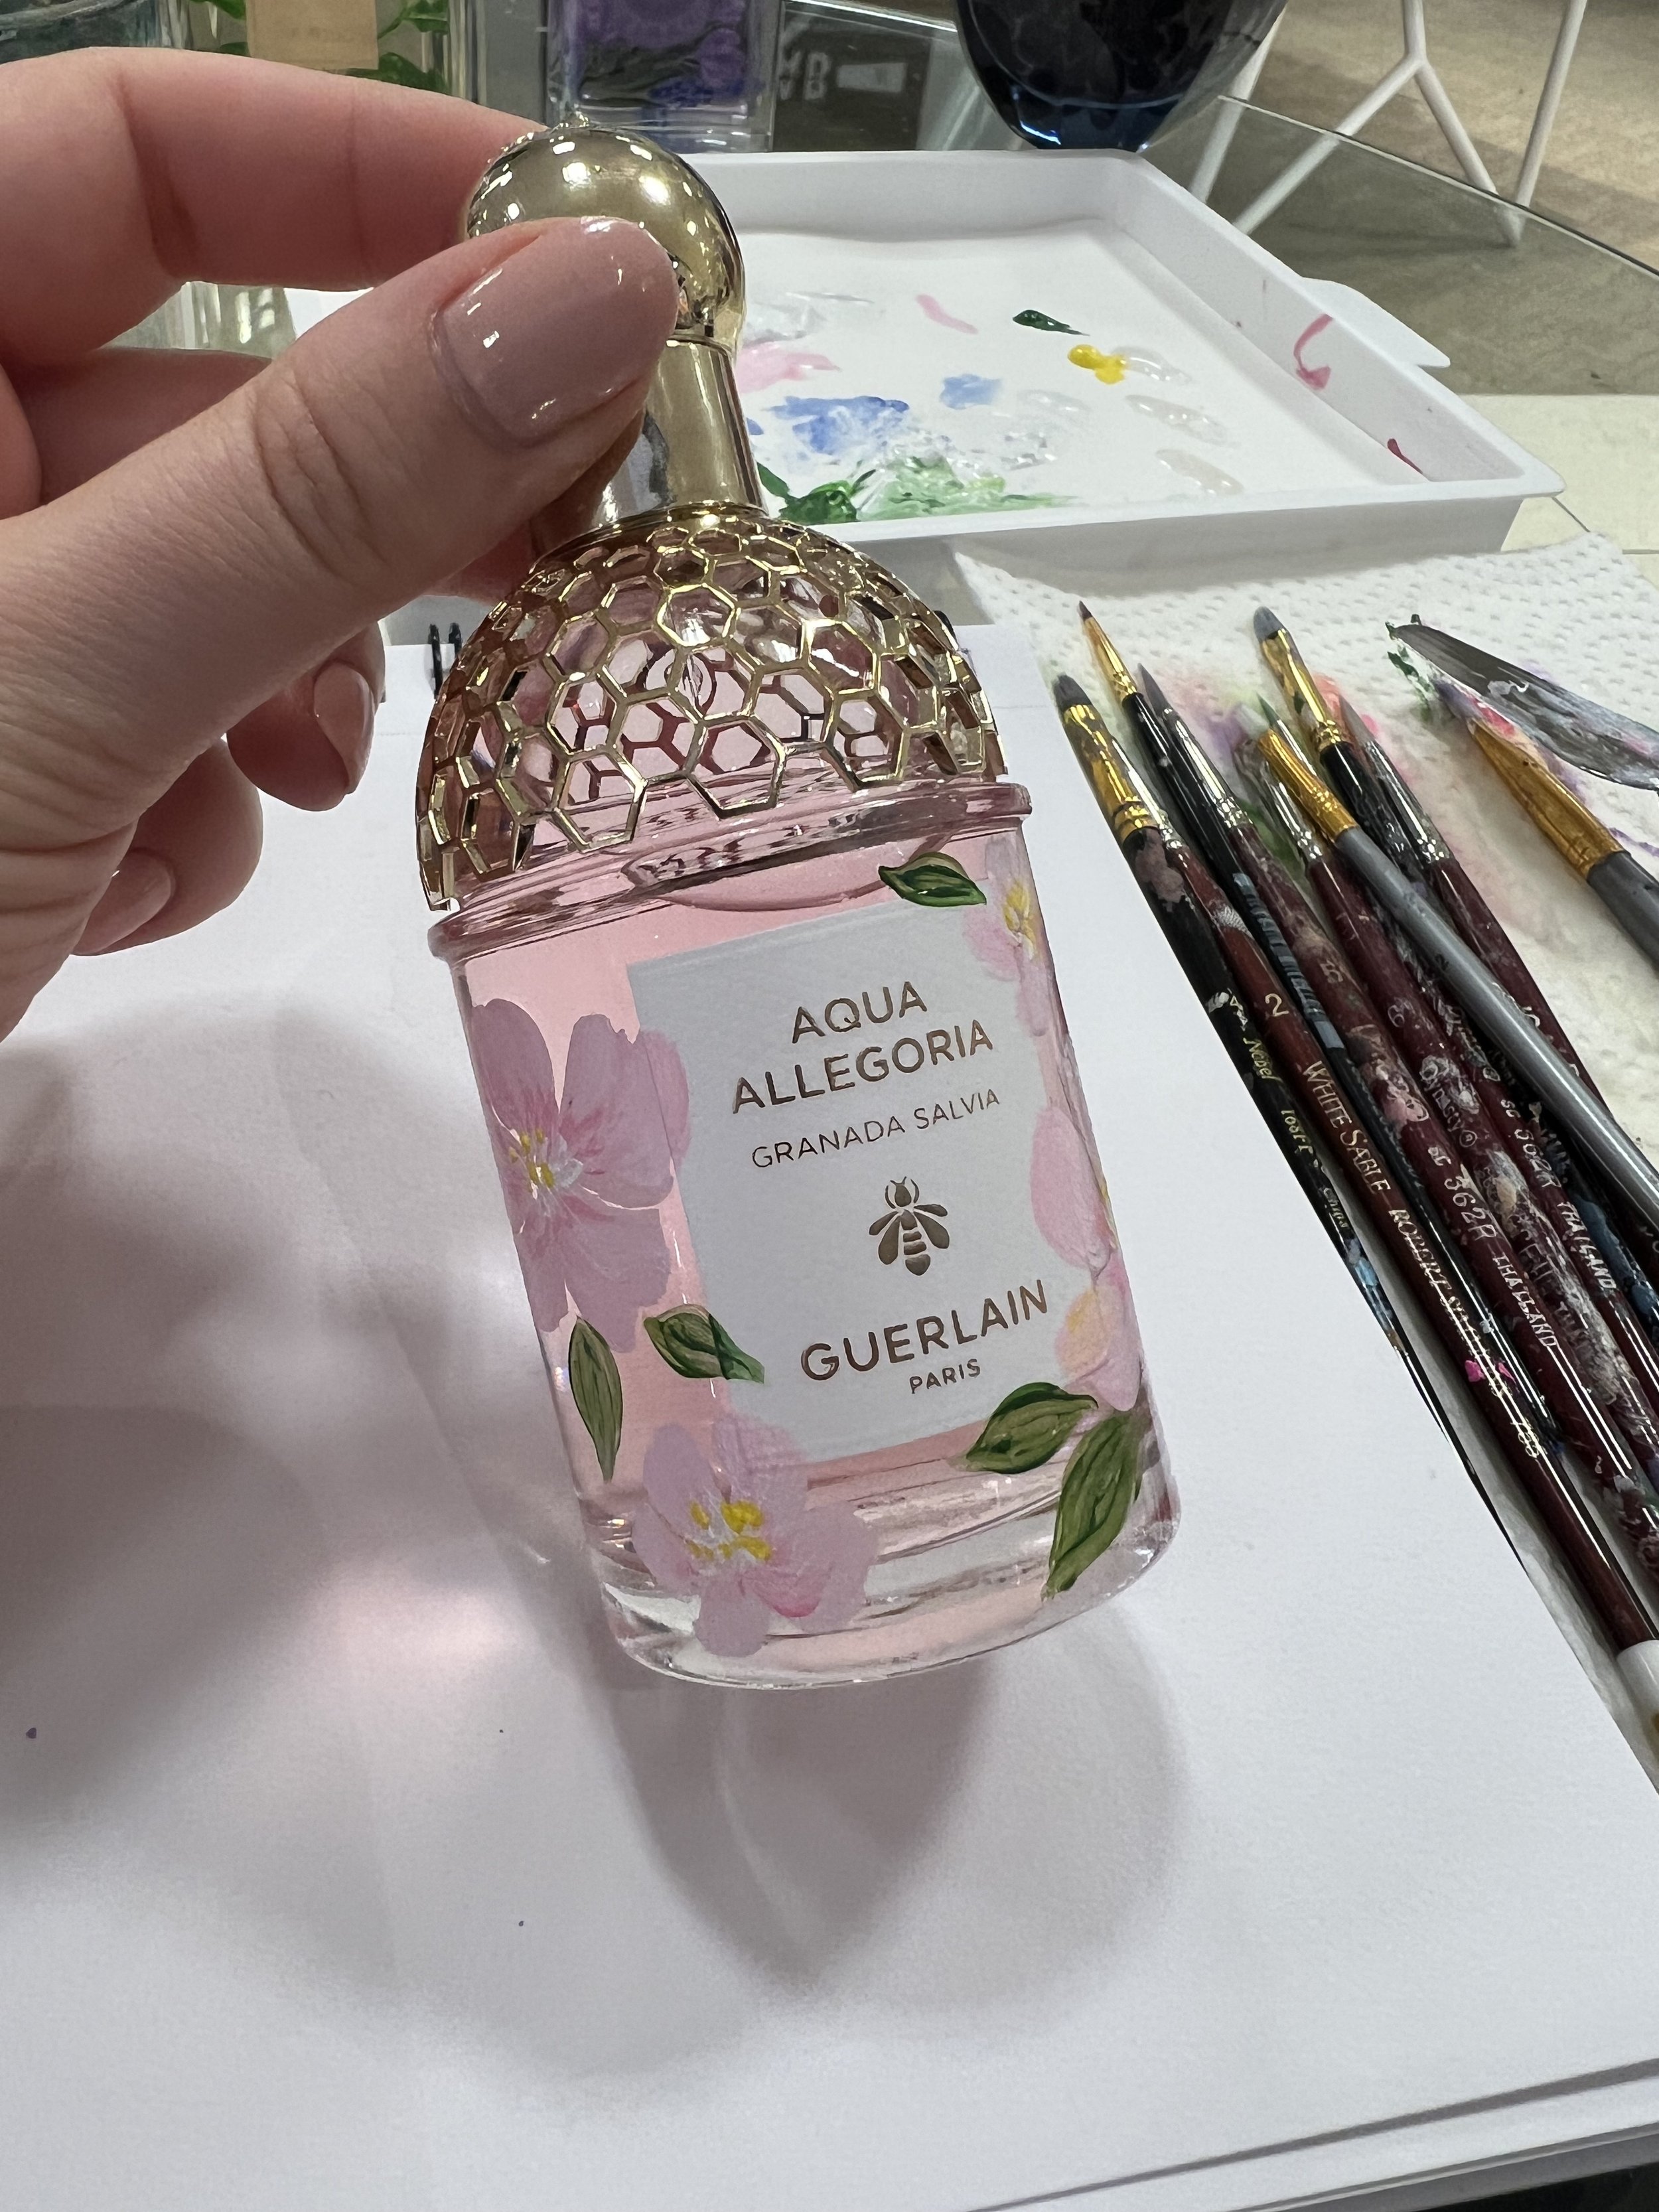 pretty-flowers-painted-on-luxury-fragrance-bottle-for-mothers-day-retail-event-montreal.jpeg